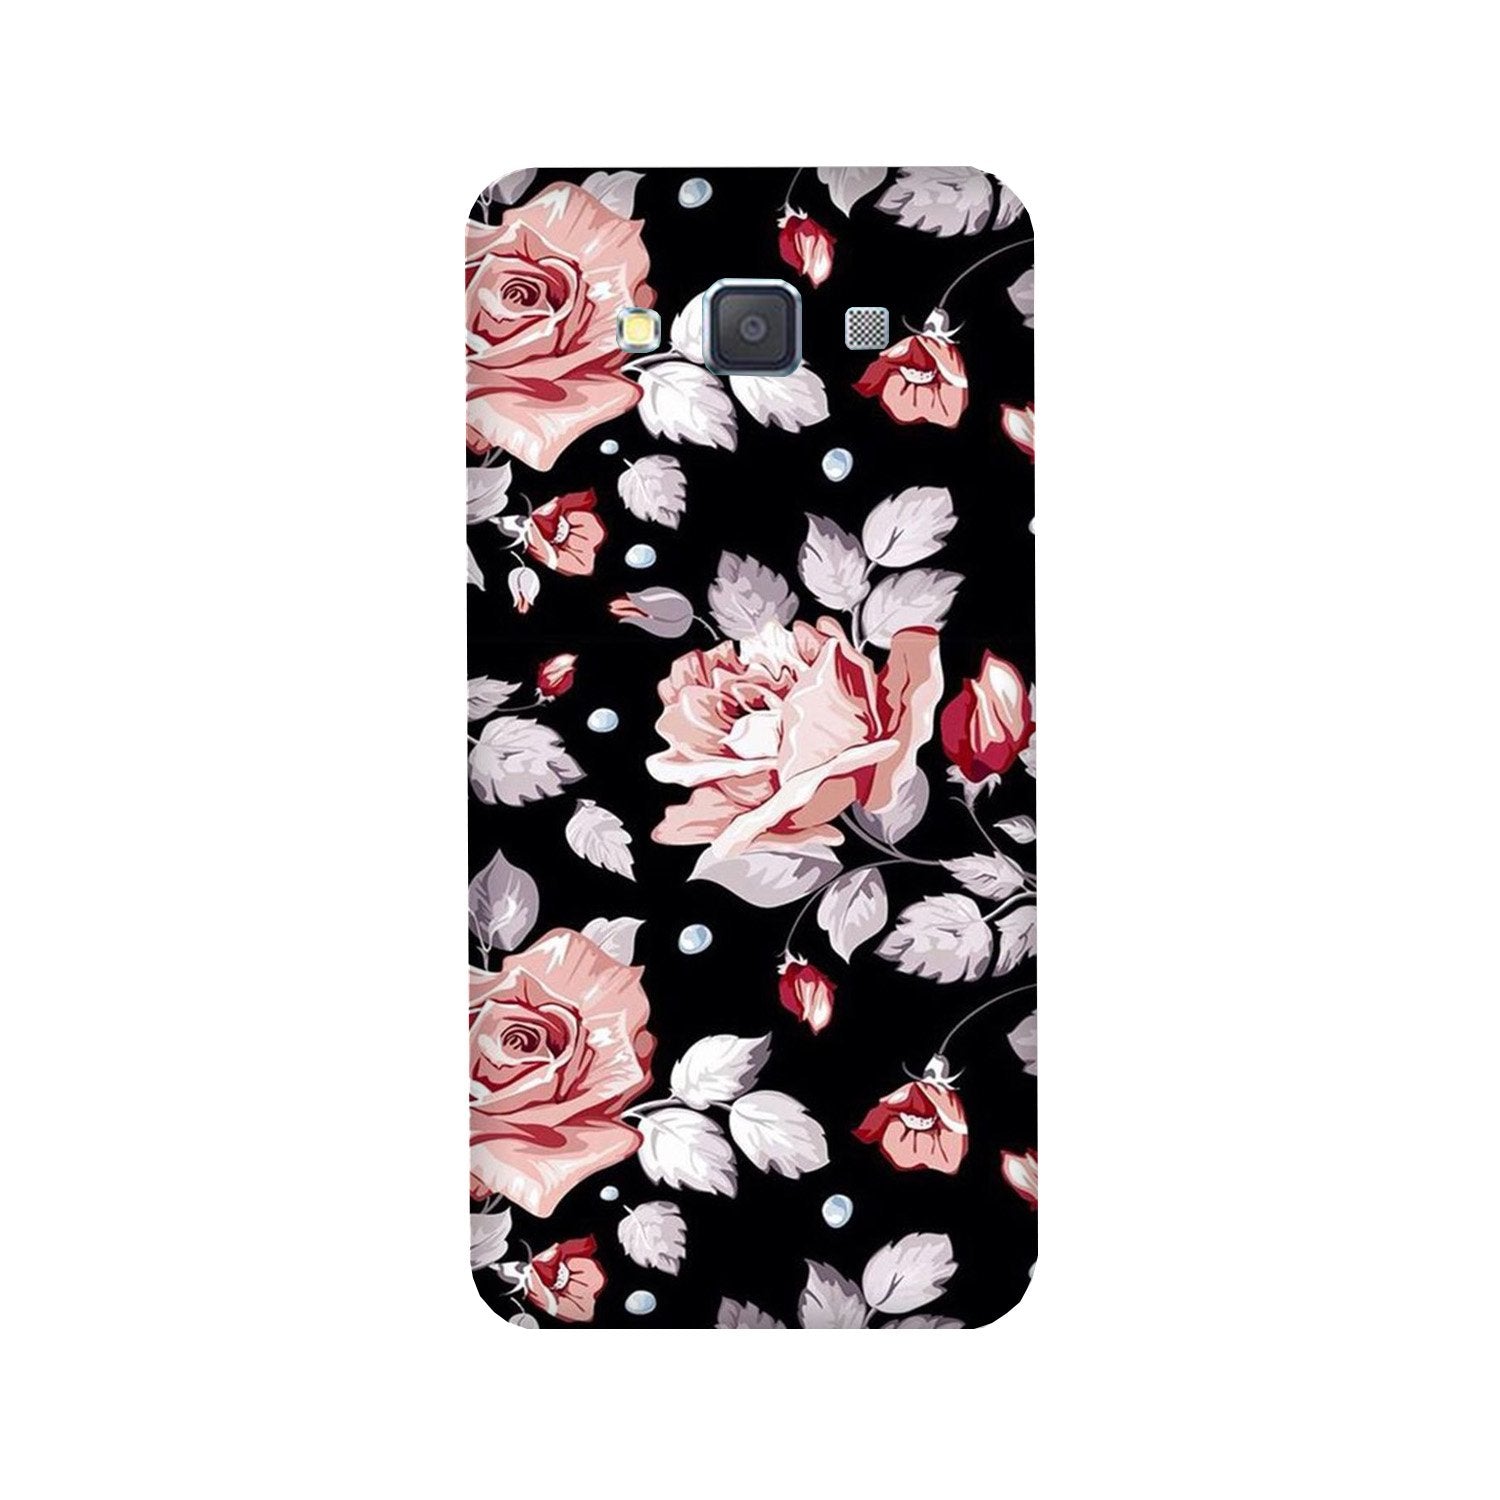 Pink rose Case for Galaxy J7 (2016)